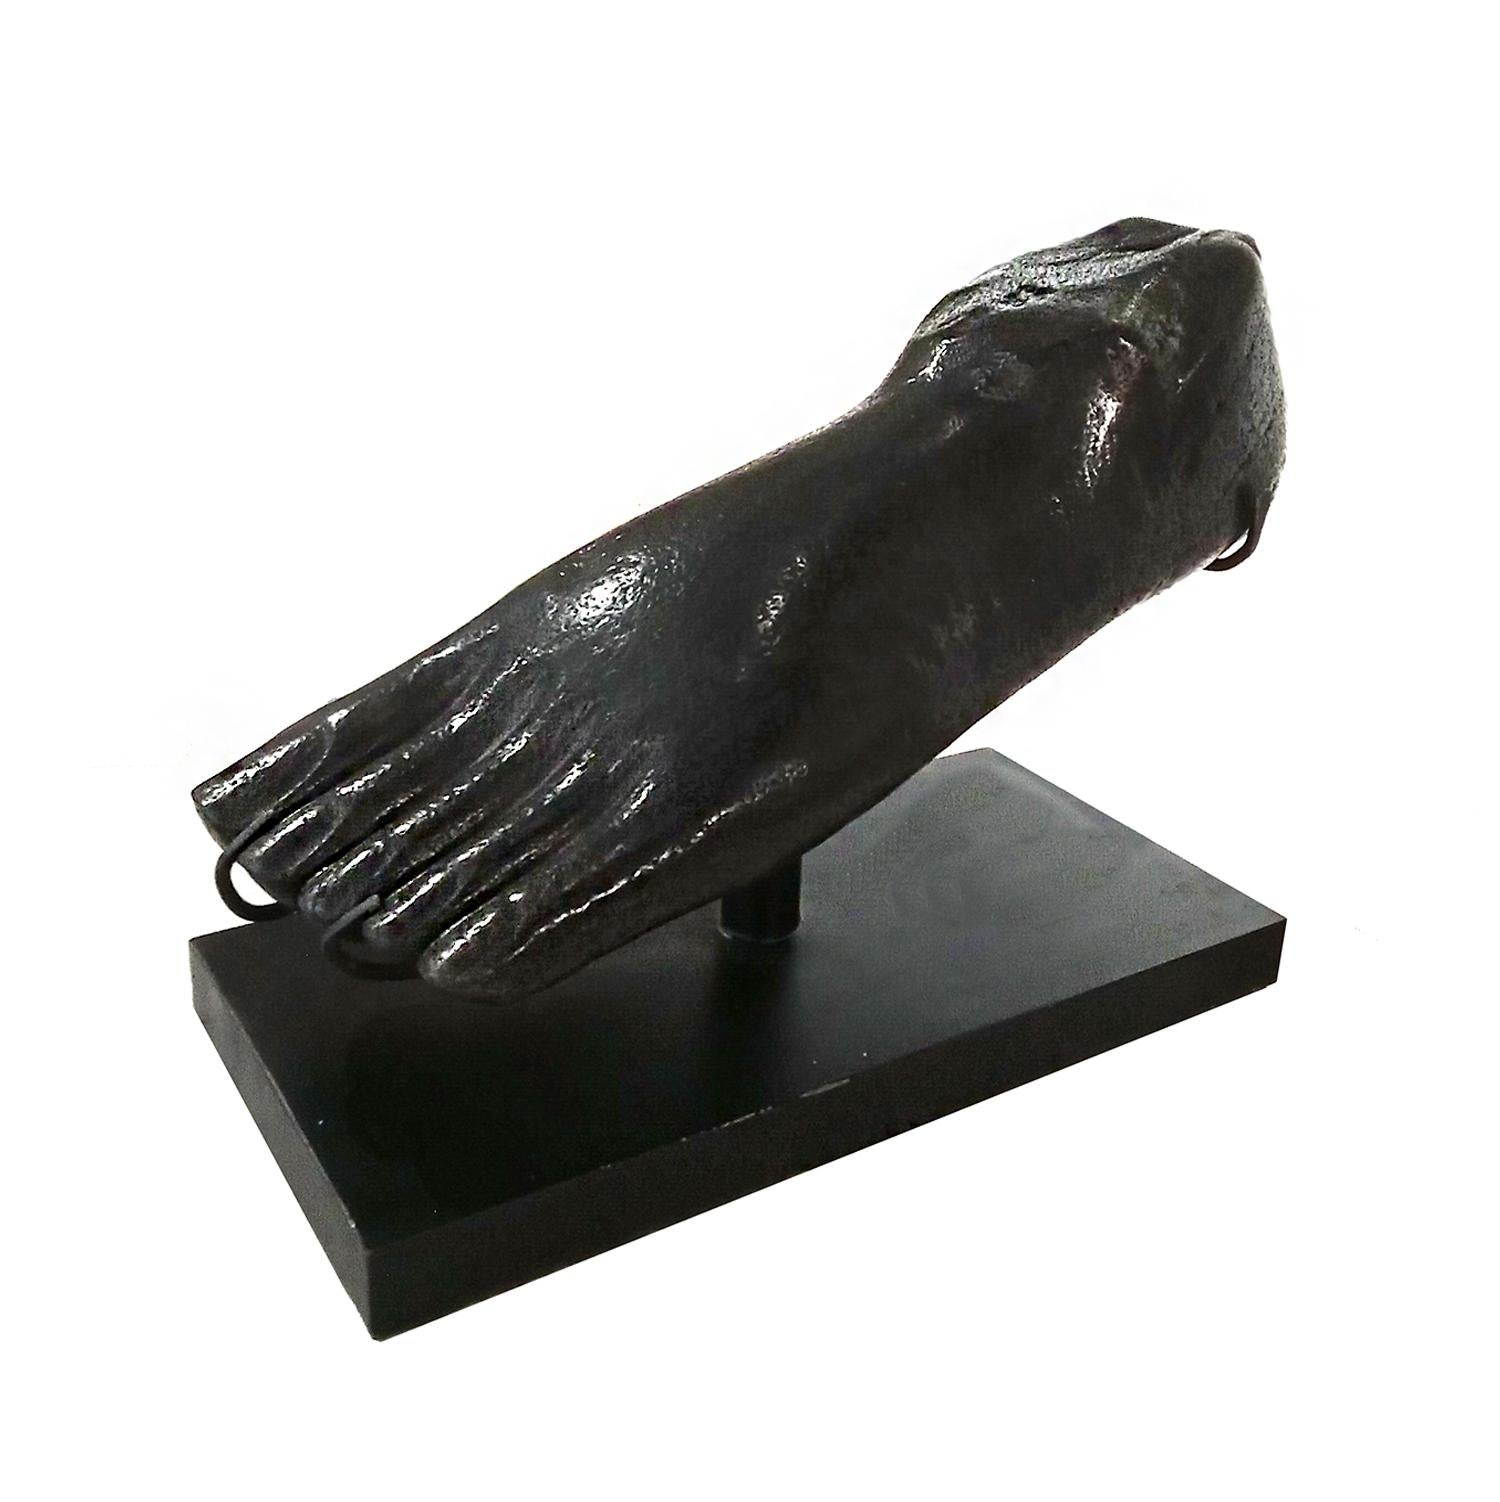 A foot sculpture from Indonesia, hand carved in solid river rock and polished. Original black color. Mounted on a black metal stand. Dimensions: 15 inches wide, 6.5 inches deep, 10.5 inches high.
Can be used outdoors as a garden element or patio